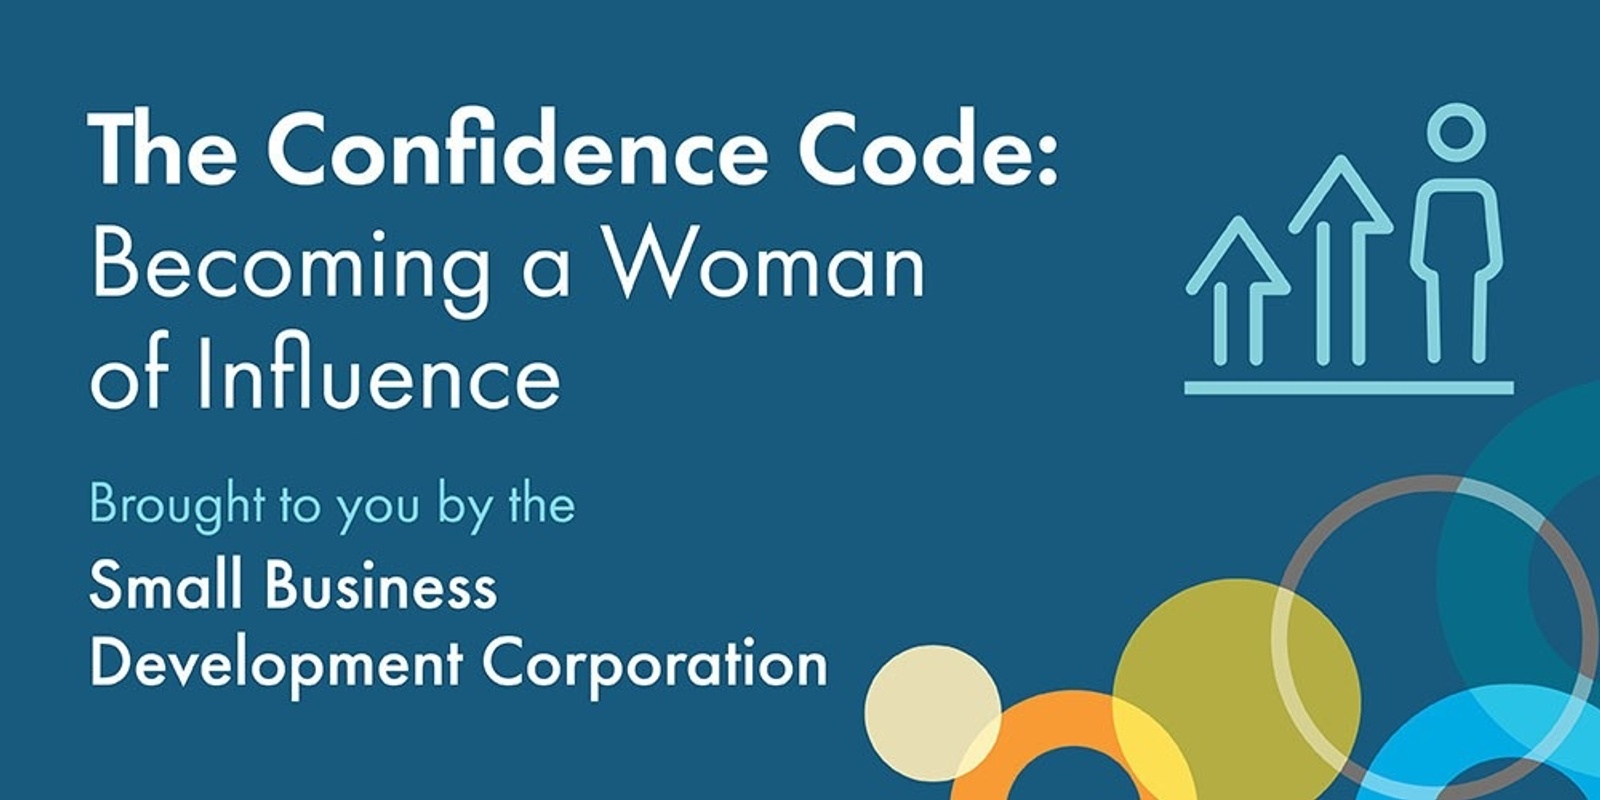 The Confidence Code: Becoming a Woman of Influence